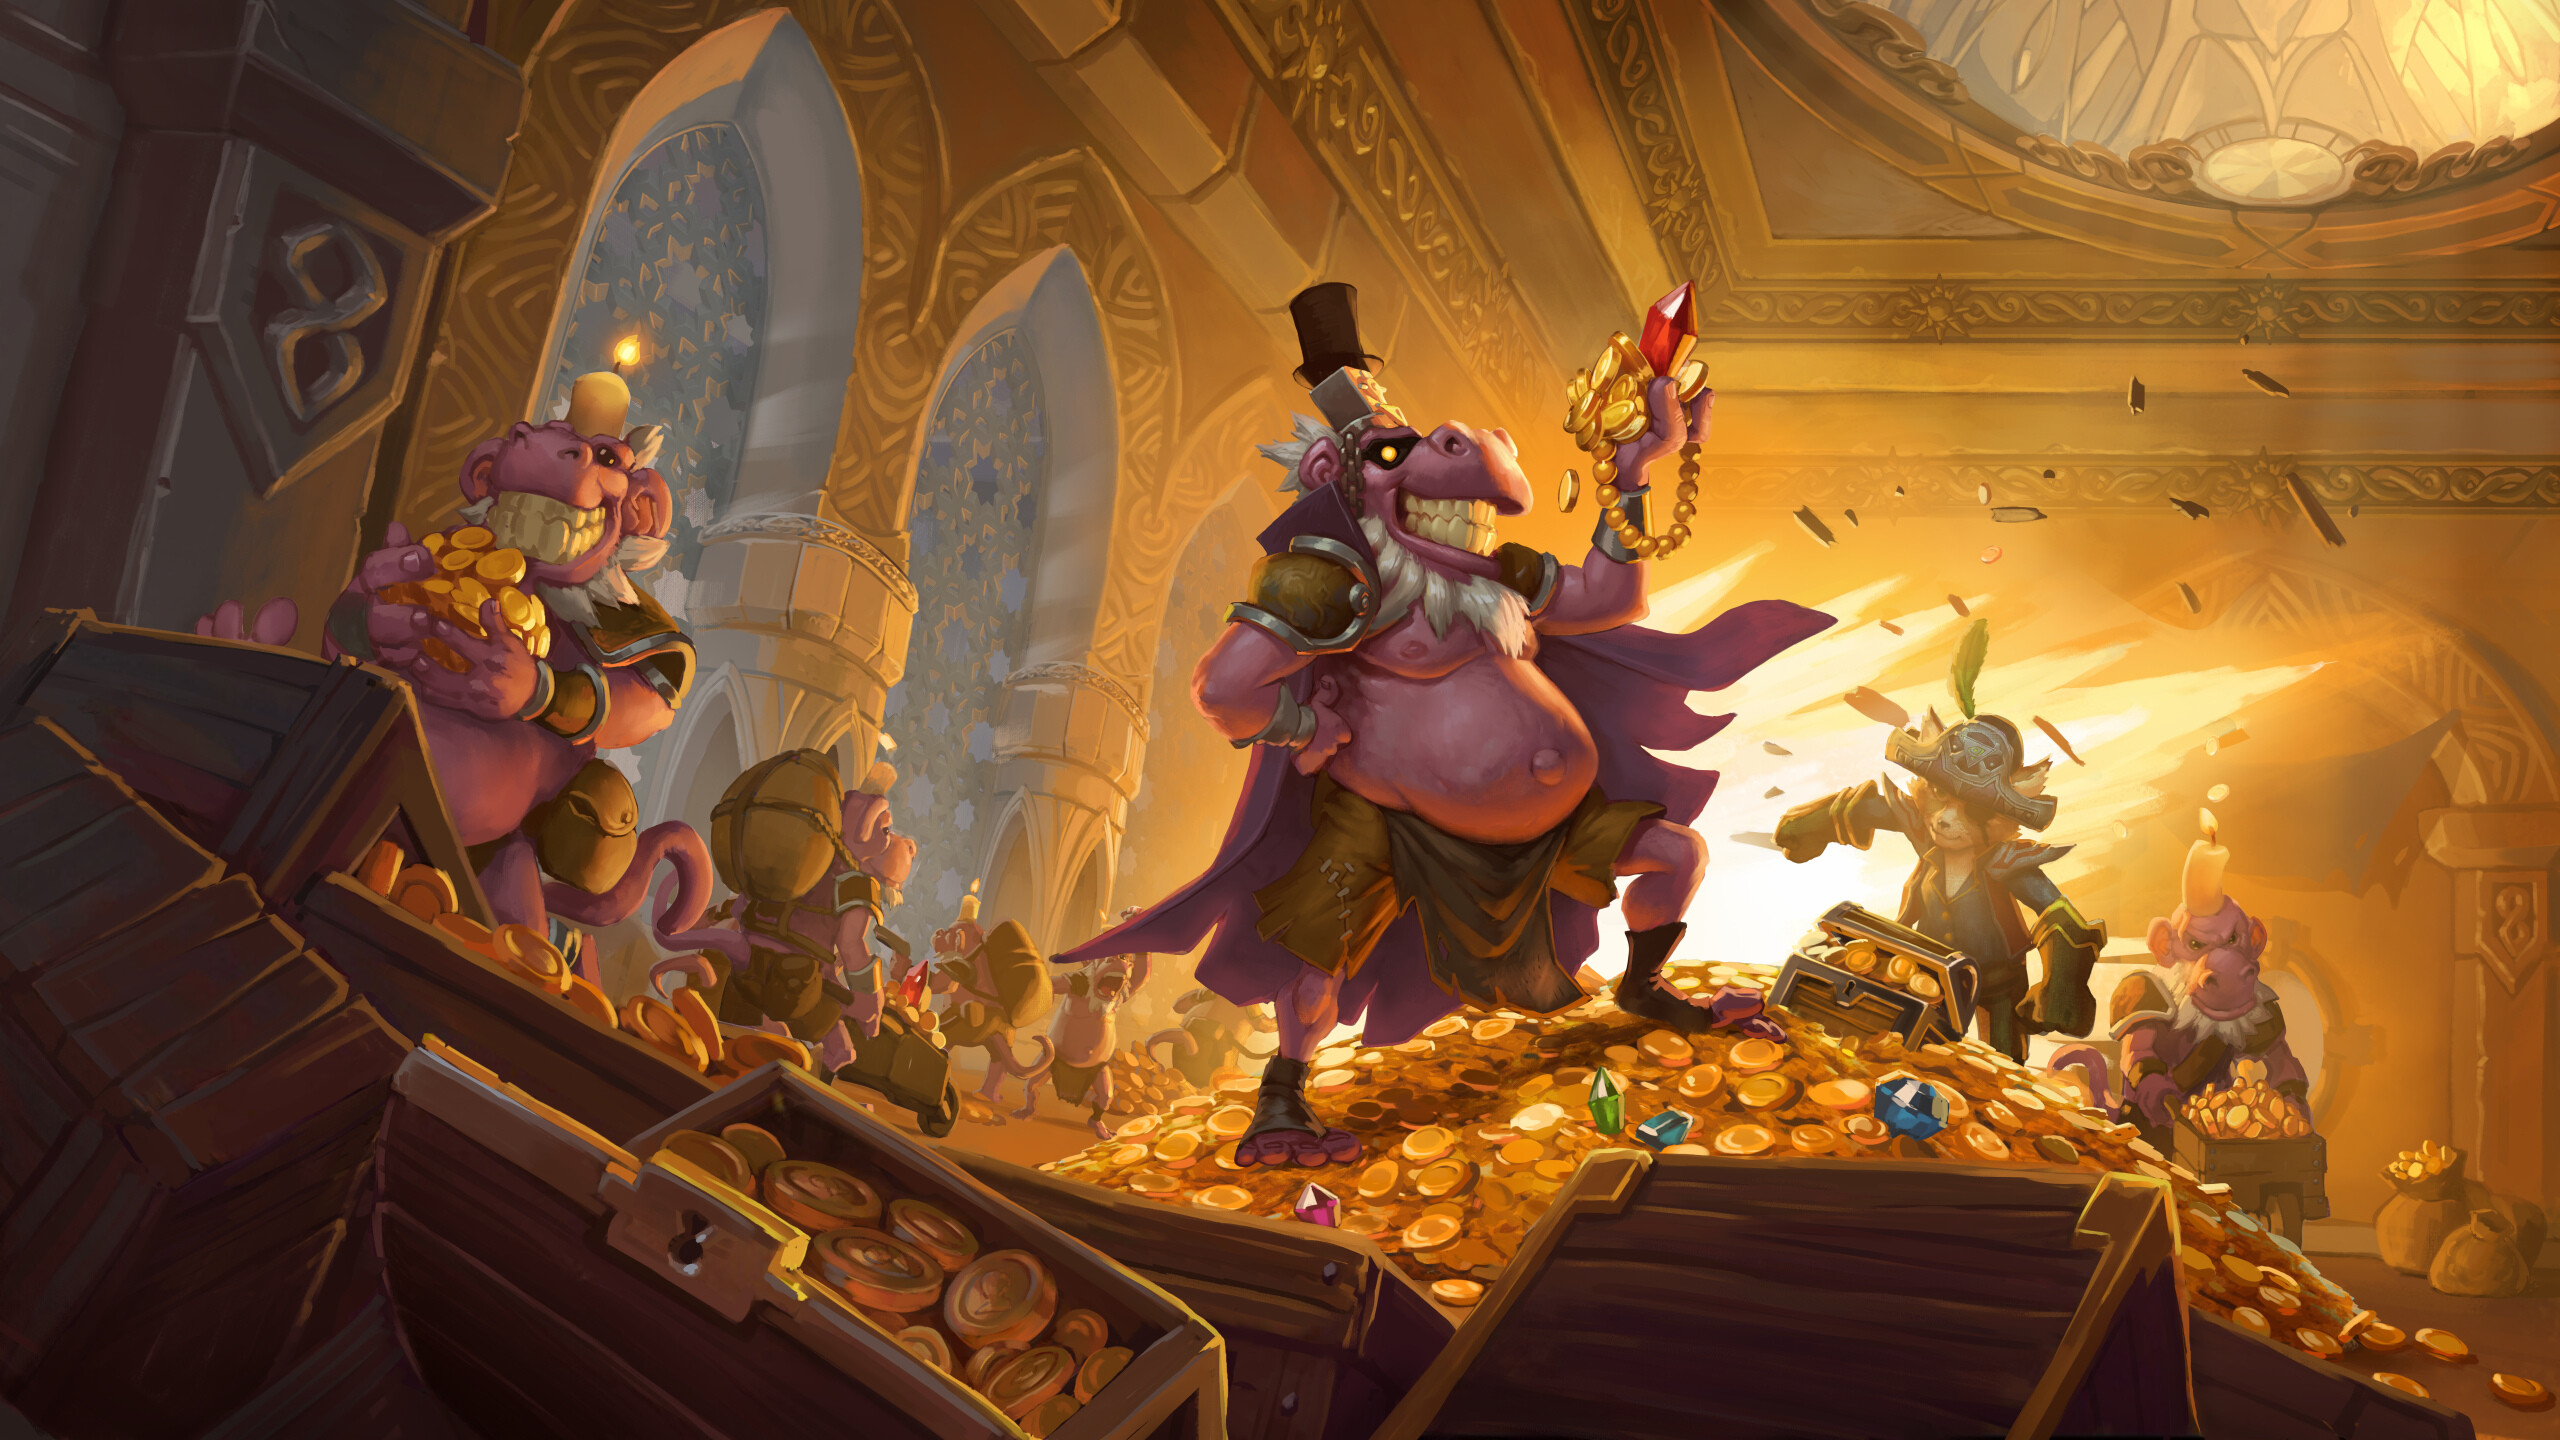 Hearthstone: Blizzard releases expansions of additional cards every four months, as well as smaller mini-sets between expansions, to increase the variety in the metagame. 2560x1440 HD Background.